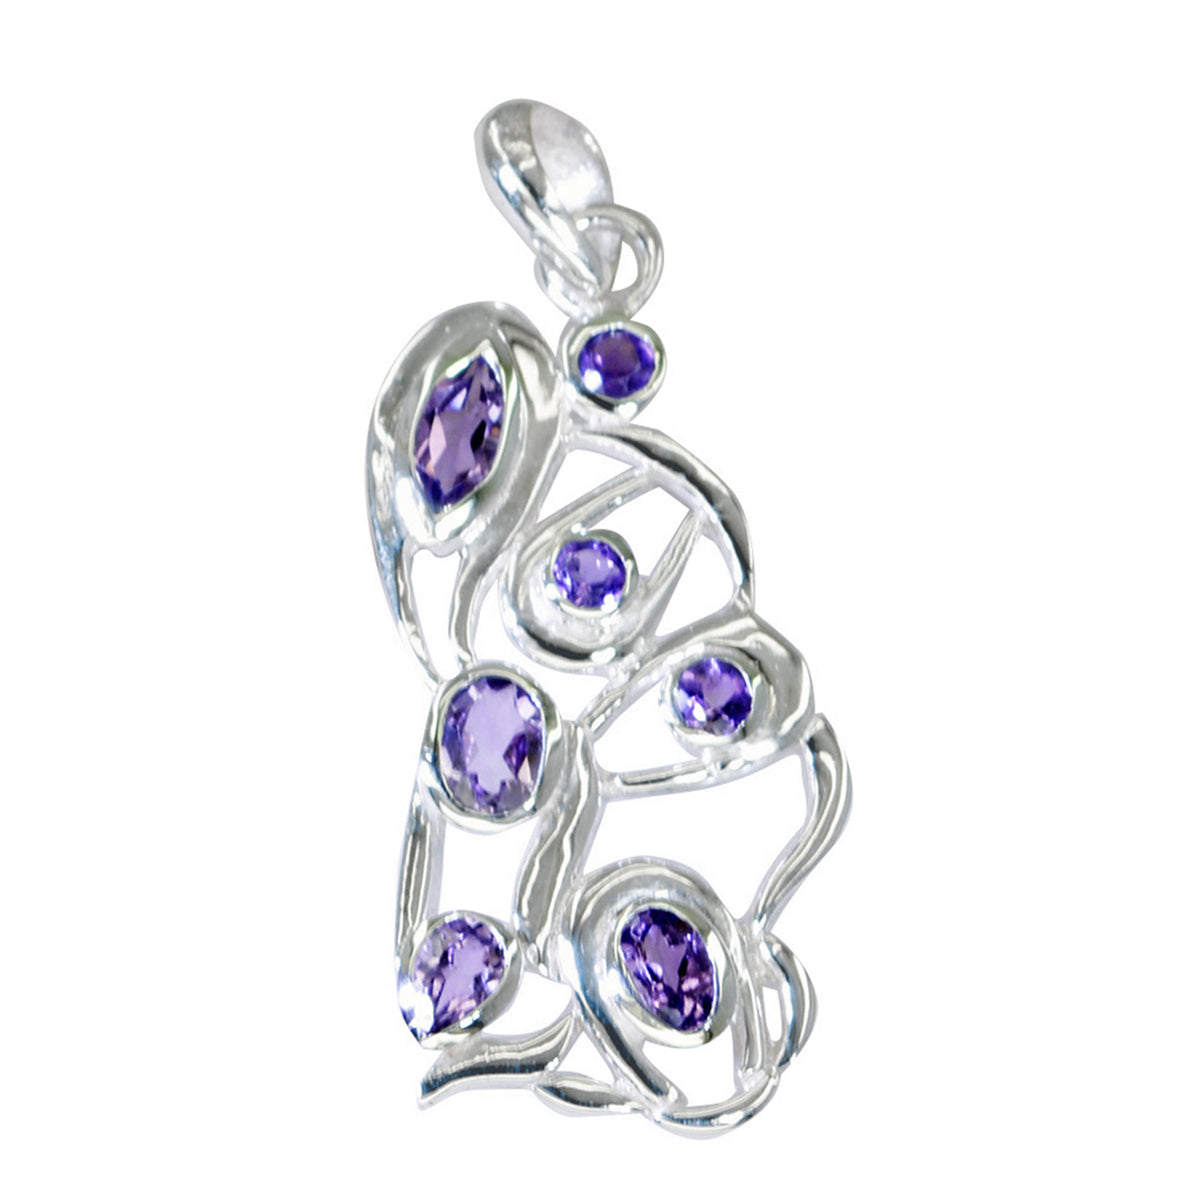 Riyo Exquisite Gems Multi Faceted Purple Amethyst Solid Silver Pendant Gift For Anniversary